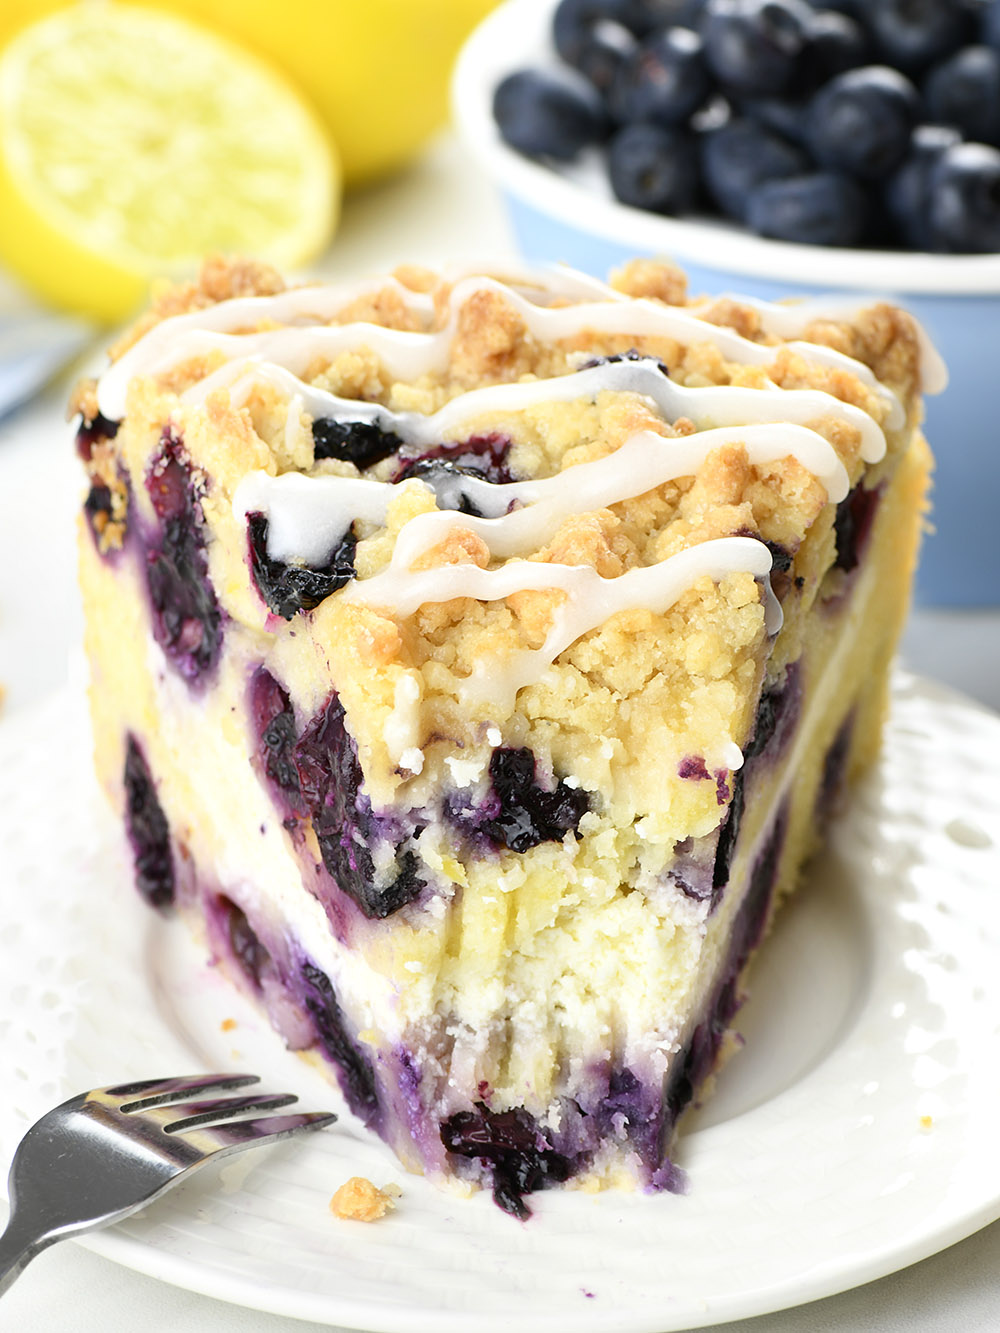 A tempting piece of Lemon Blueberry Coffee Cake on a clean white plate. The cake showcases a golden-brown crust with visible blueberries, its moist interior offering a contrast in color. A zesty lemon and a bunch of ripe blueberries rest in the background, adding to the vibrant color palette and hinting at the flavorful ingredients used in the cake.